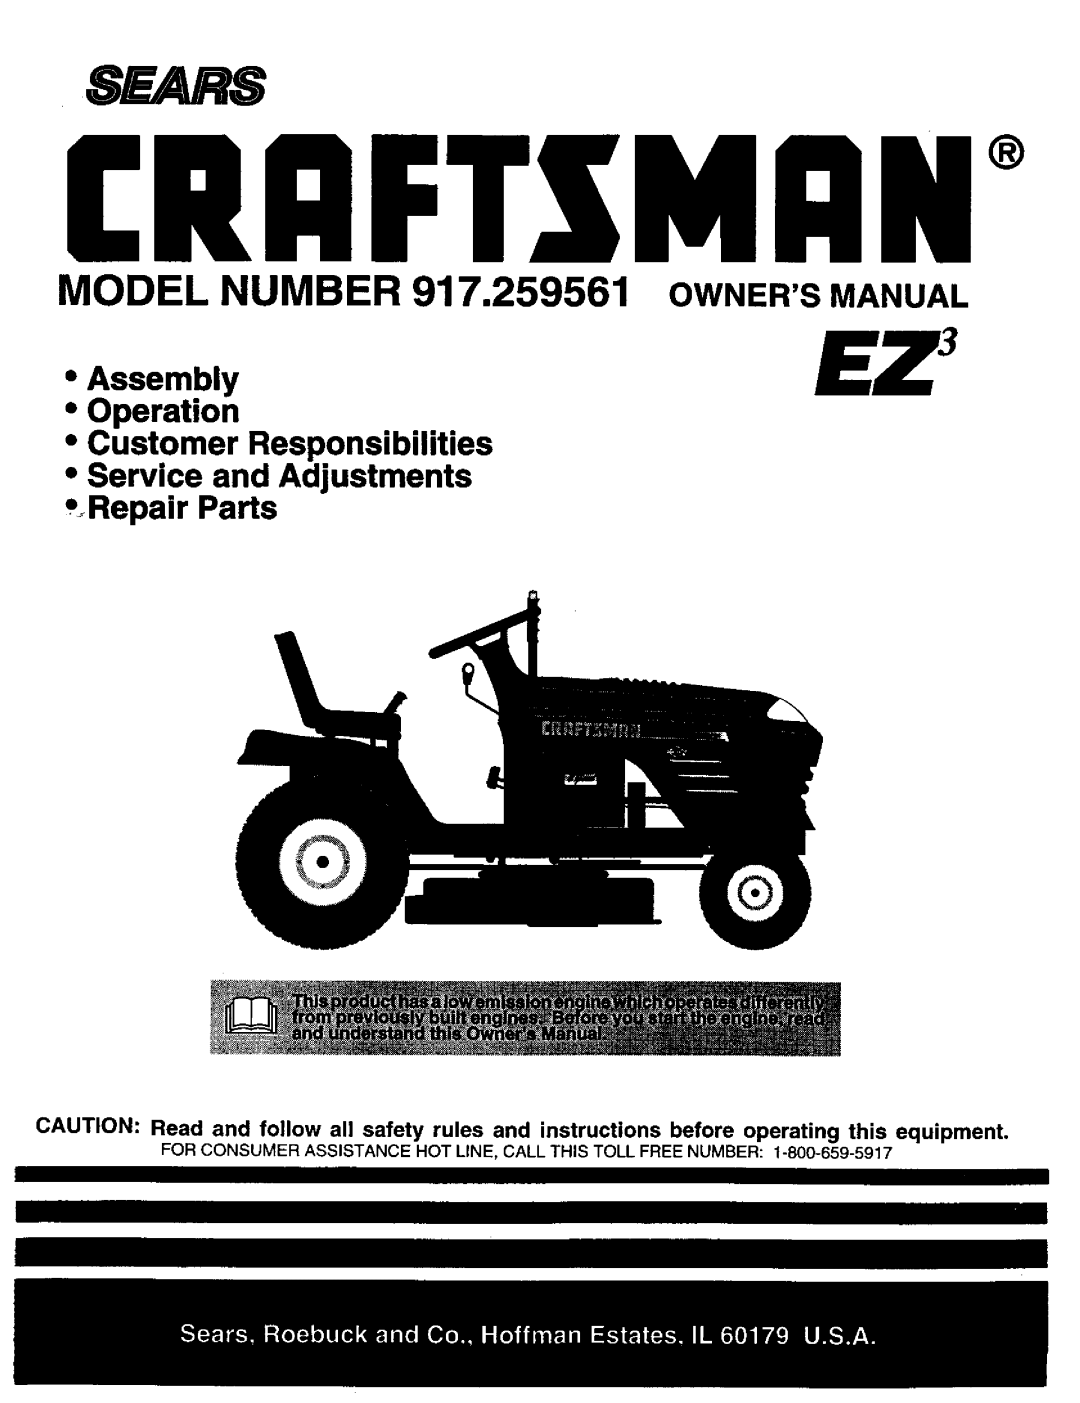 Craftsman owner manual 8EAR8, MODEL NUMBER 917.259561 OWNERSMANUAL, •Assembly •Operation •Customer Responsibilities 